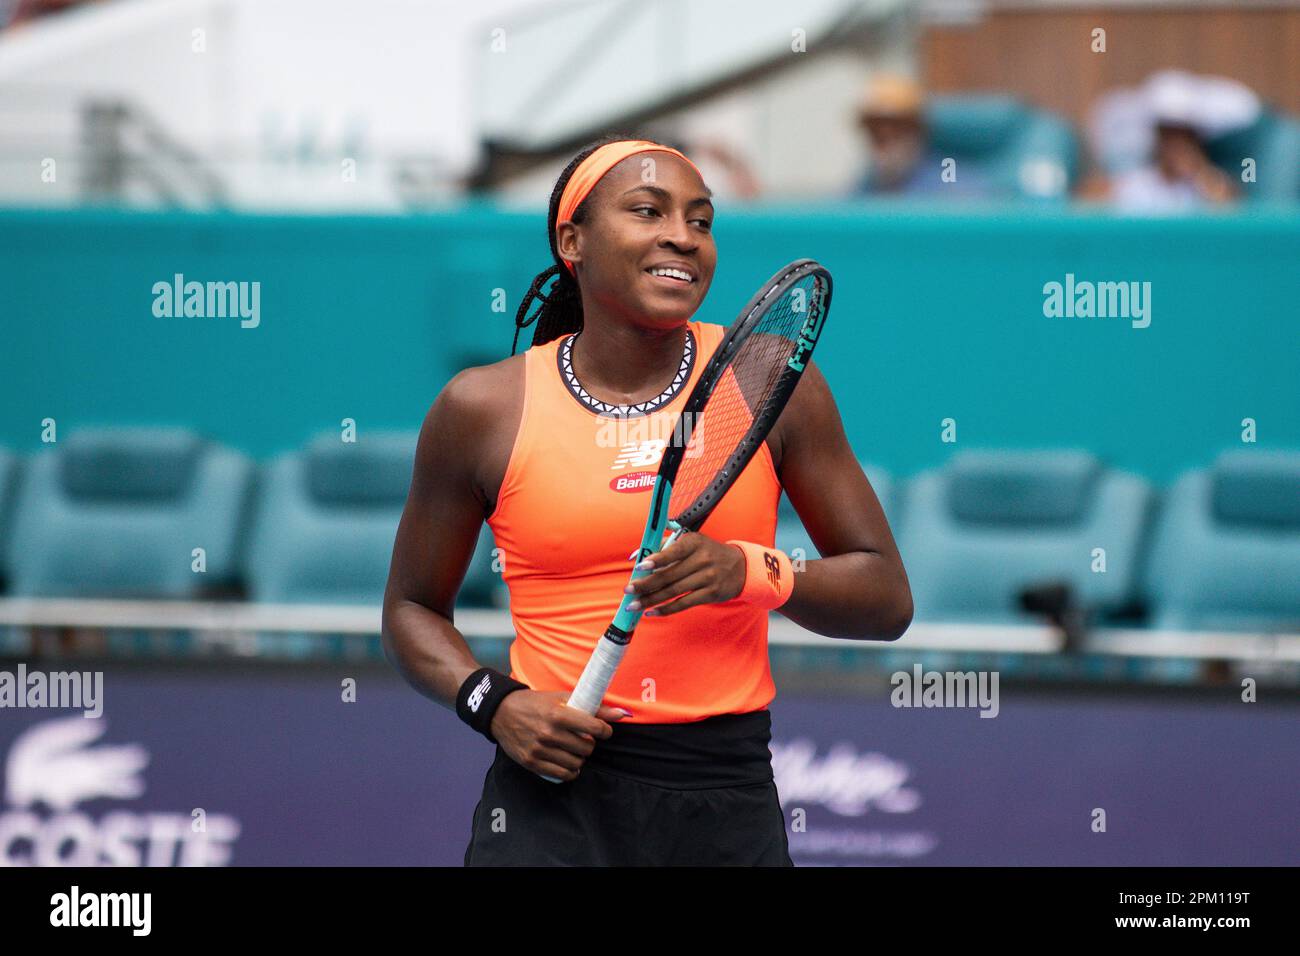 Coco Gauff of the U.S. during the Women's Doubles Final match of the